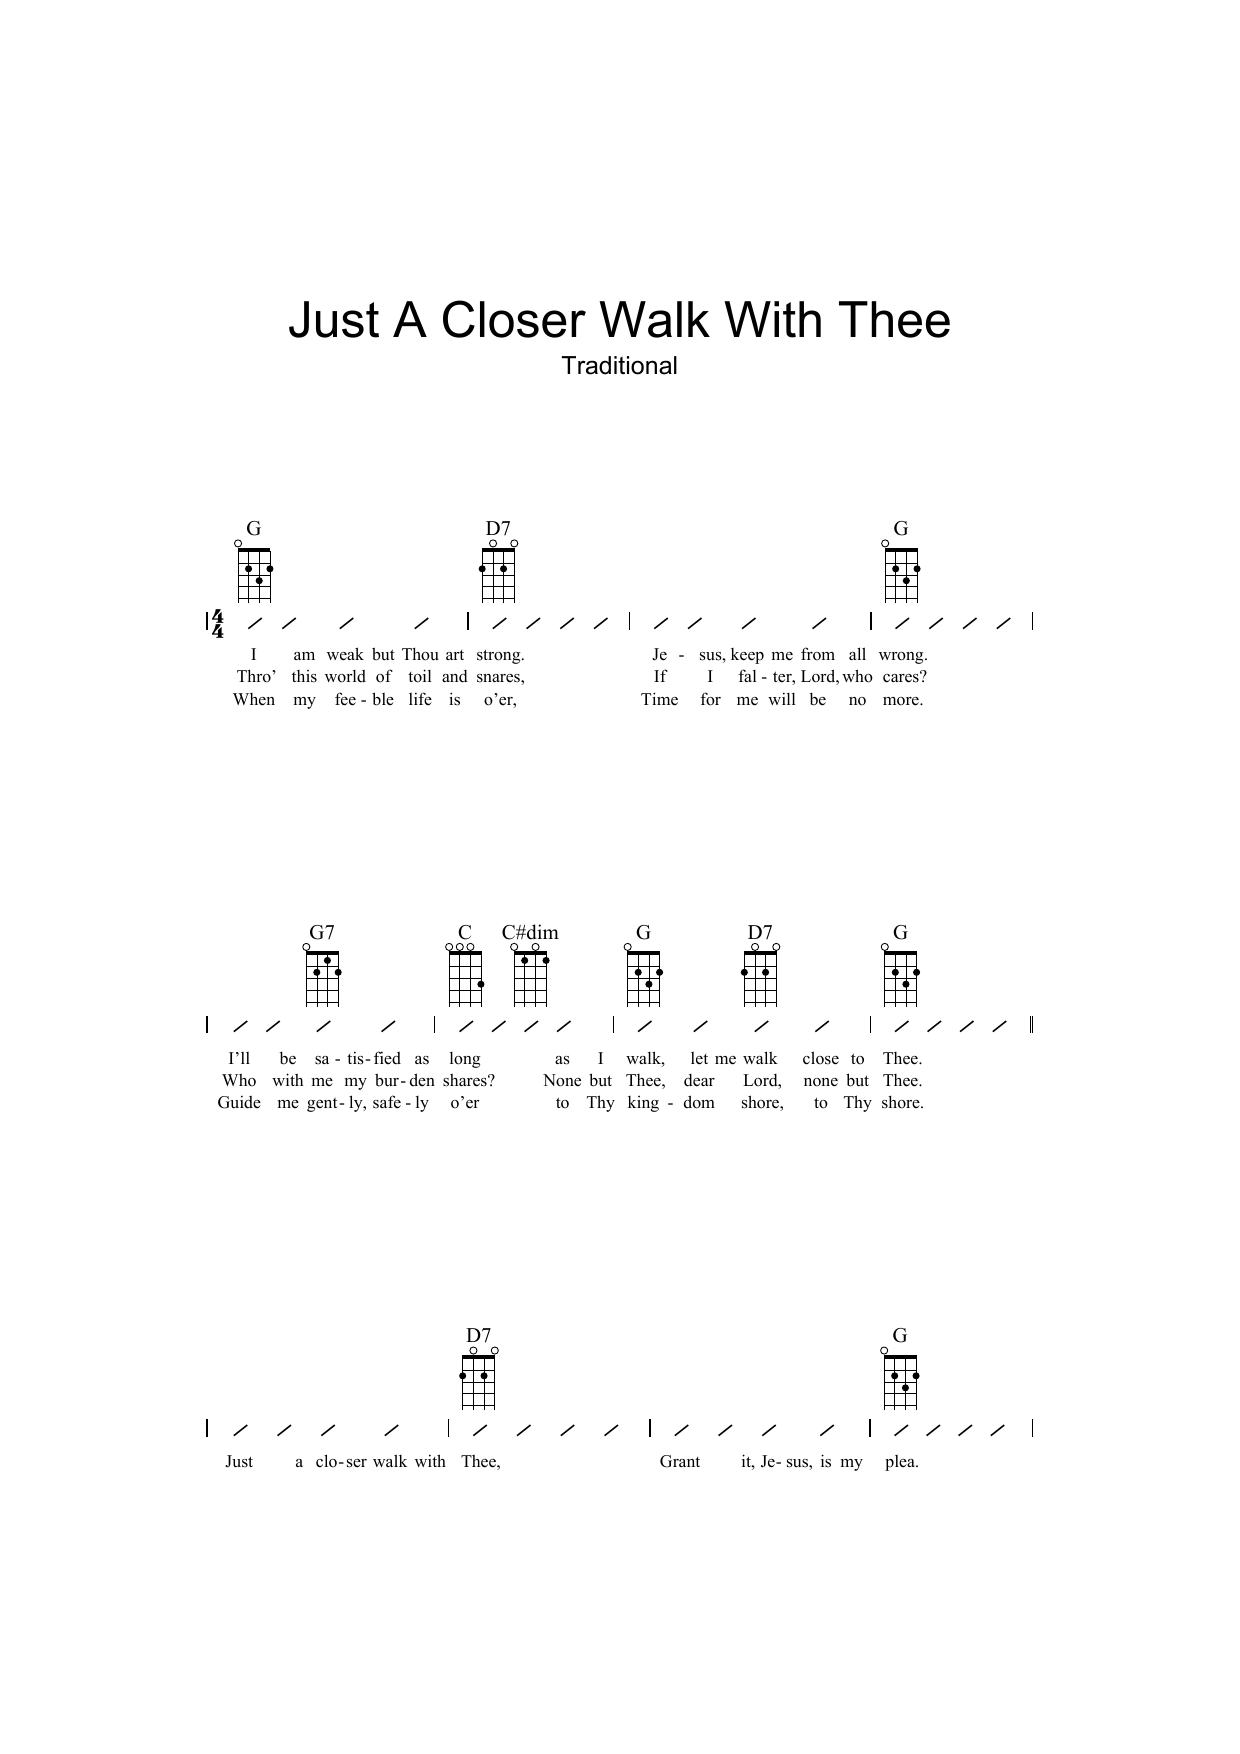 Download Traditional Just A Closer Walk With Thee Sheet Music